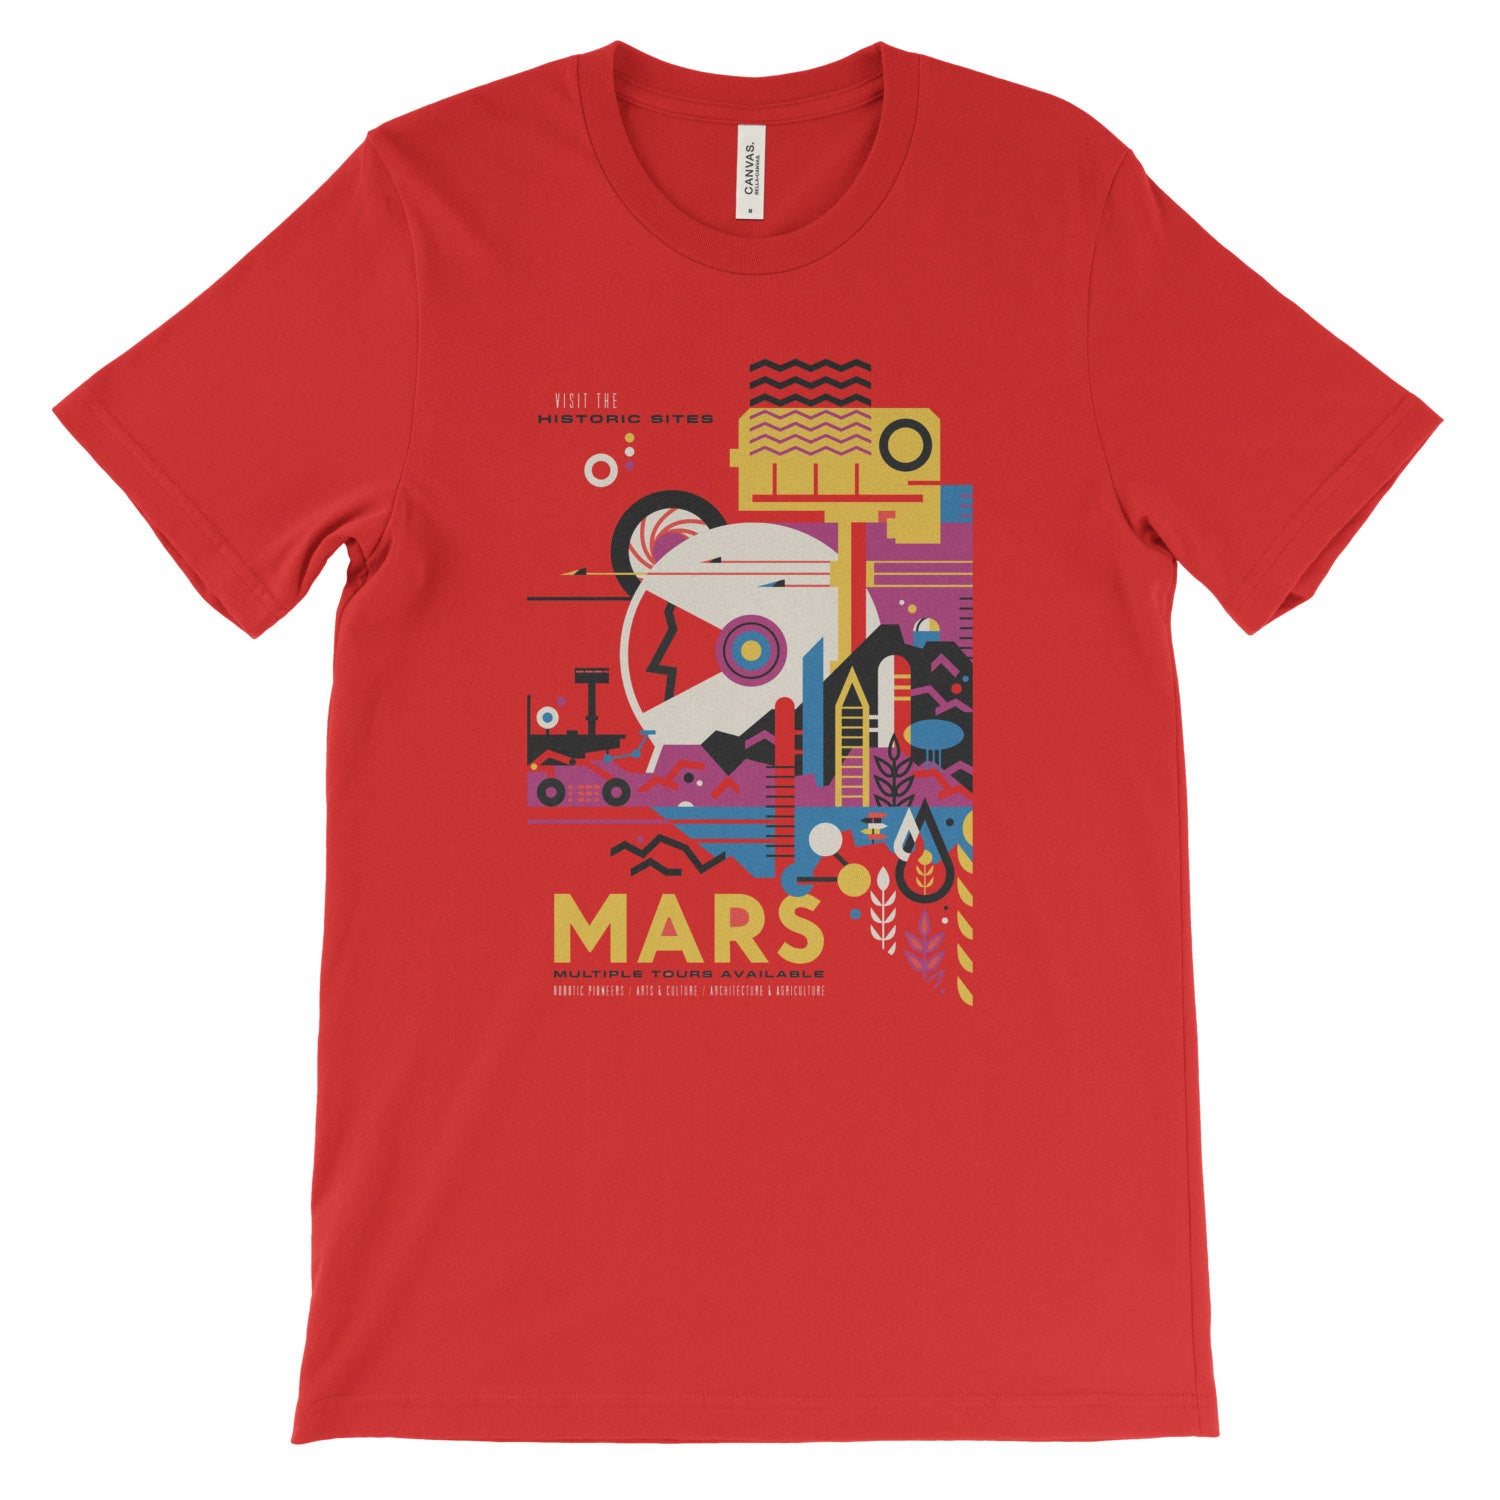 Mars T-Shirt from NASA's Visions of the Future - Mighty Circus